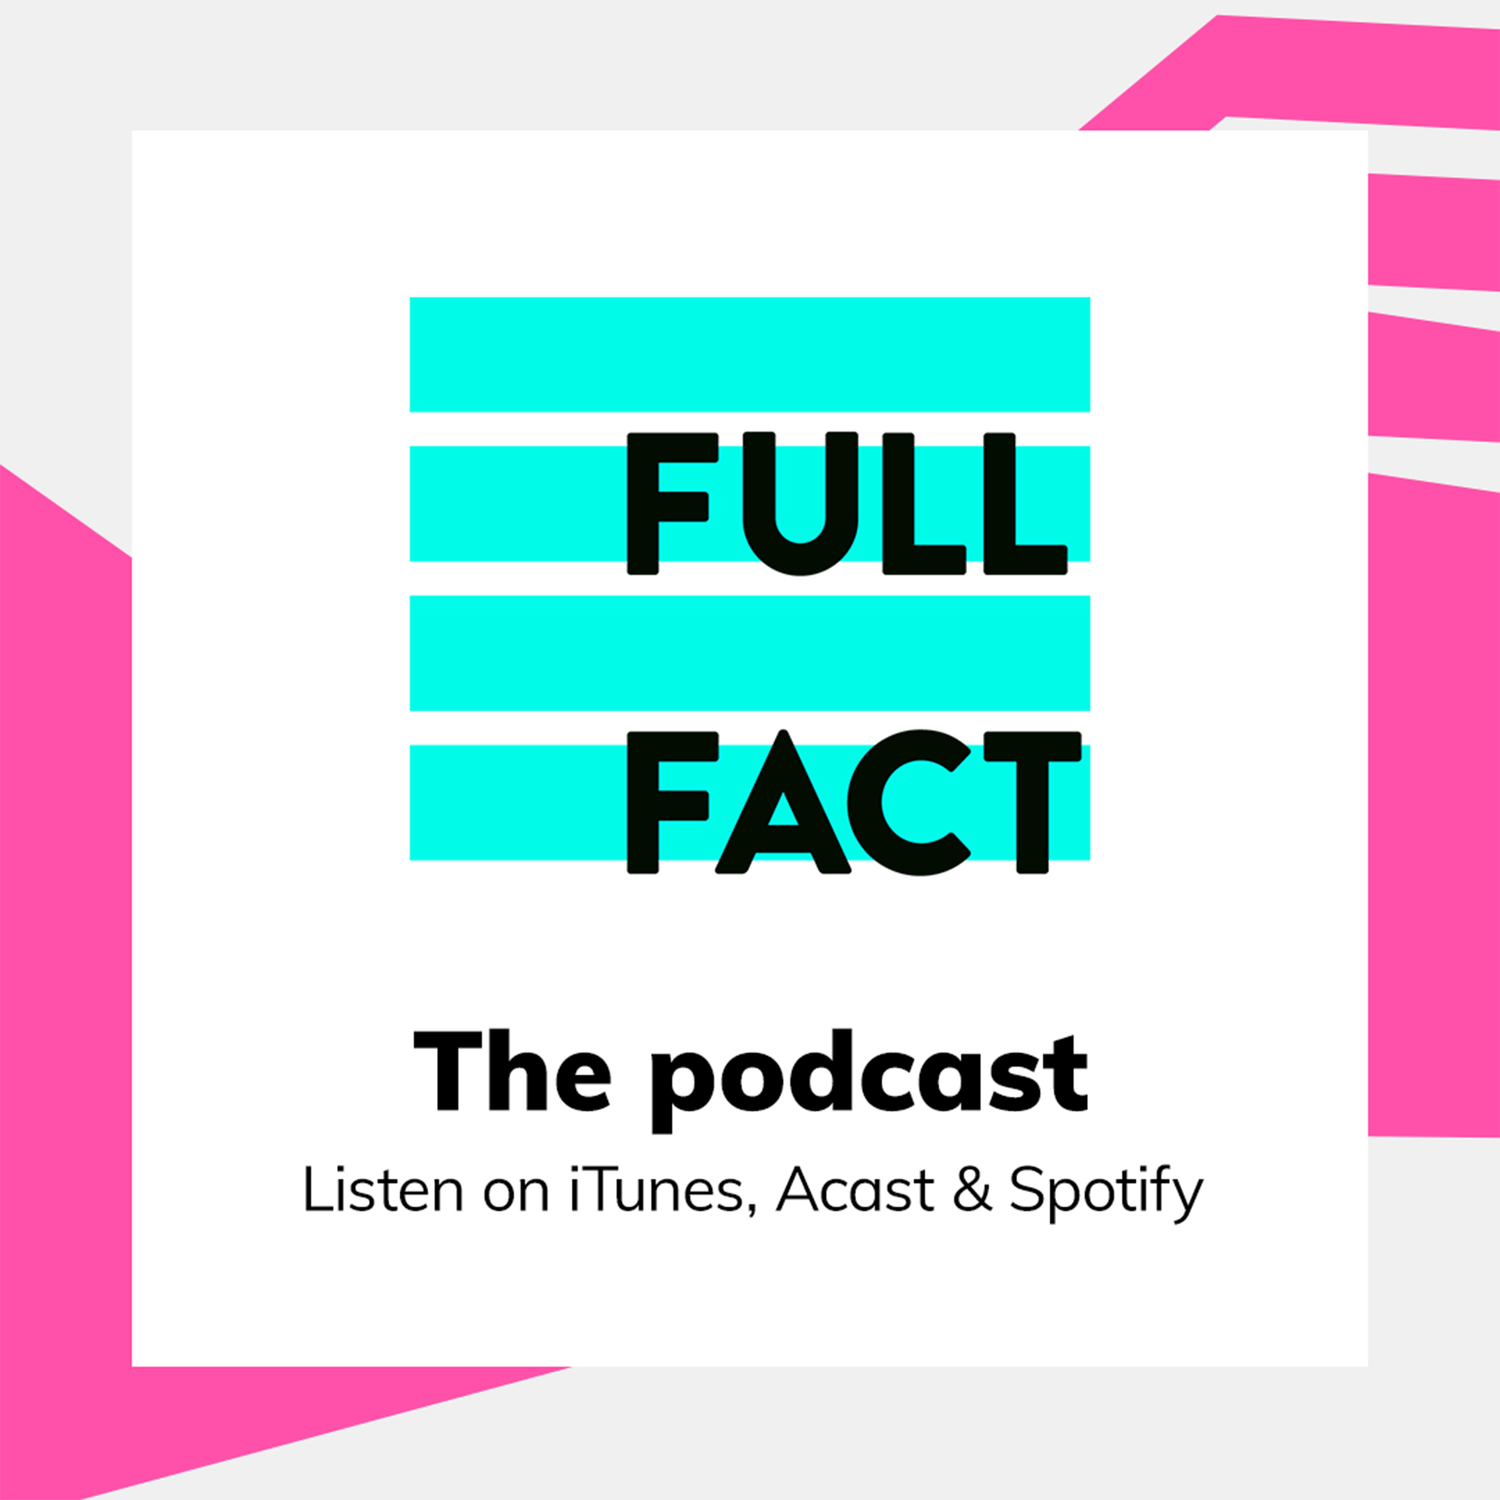 The Full Fact Podcast